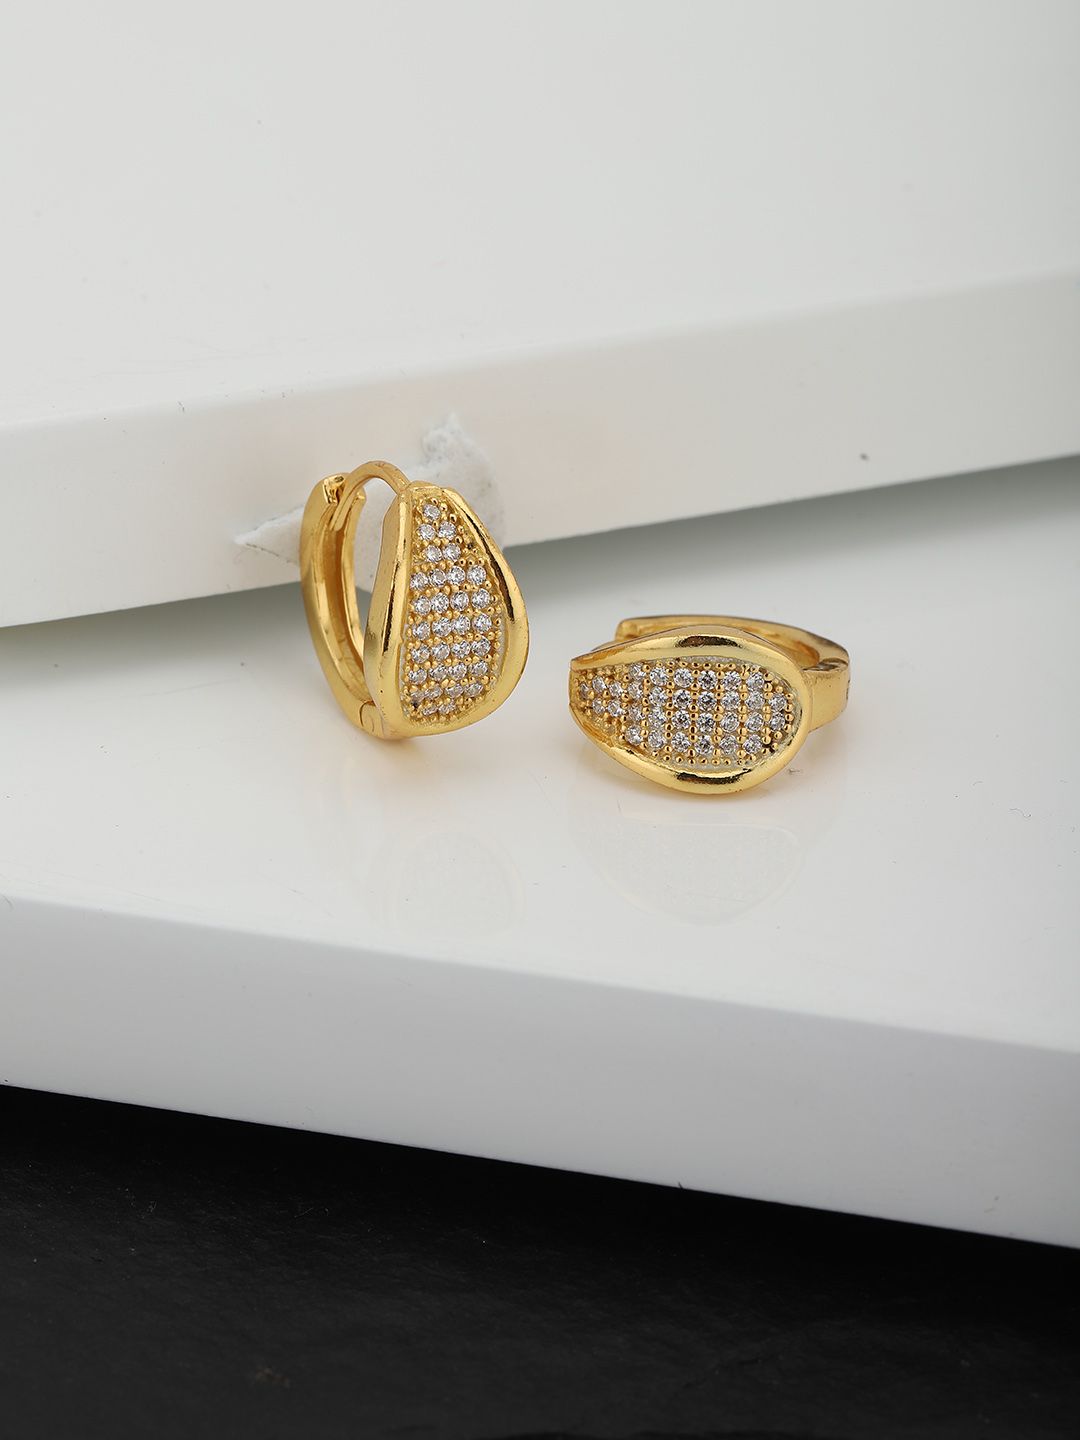 Carlton London Gold-Plated Stone Studded Contemporary Huggie Hoop Earrings Price in India